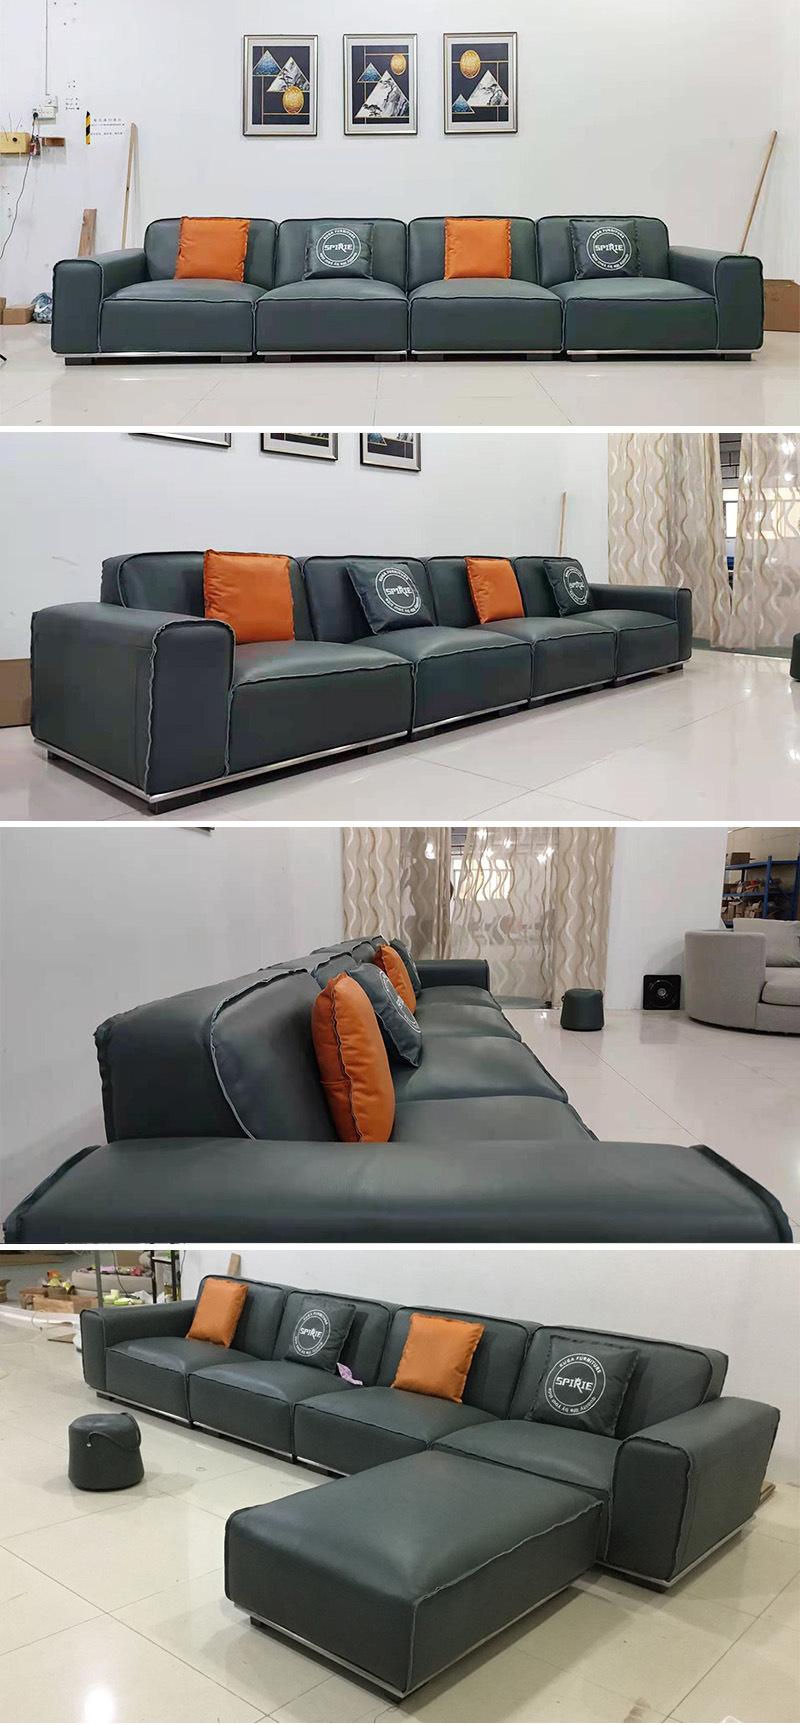 Modern Fabric Seating Contemporary Sofa Leisure Home Leather Couch for Living Room Furniture Set